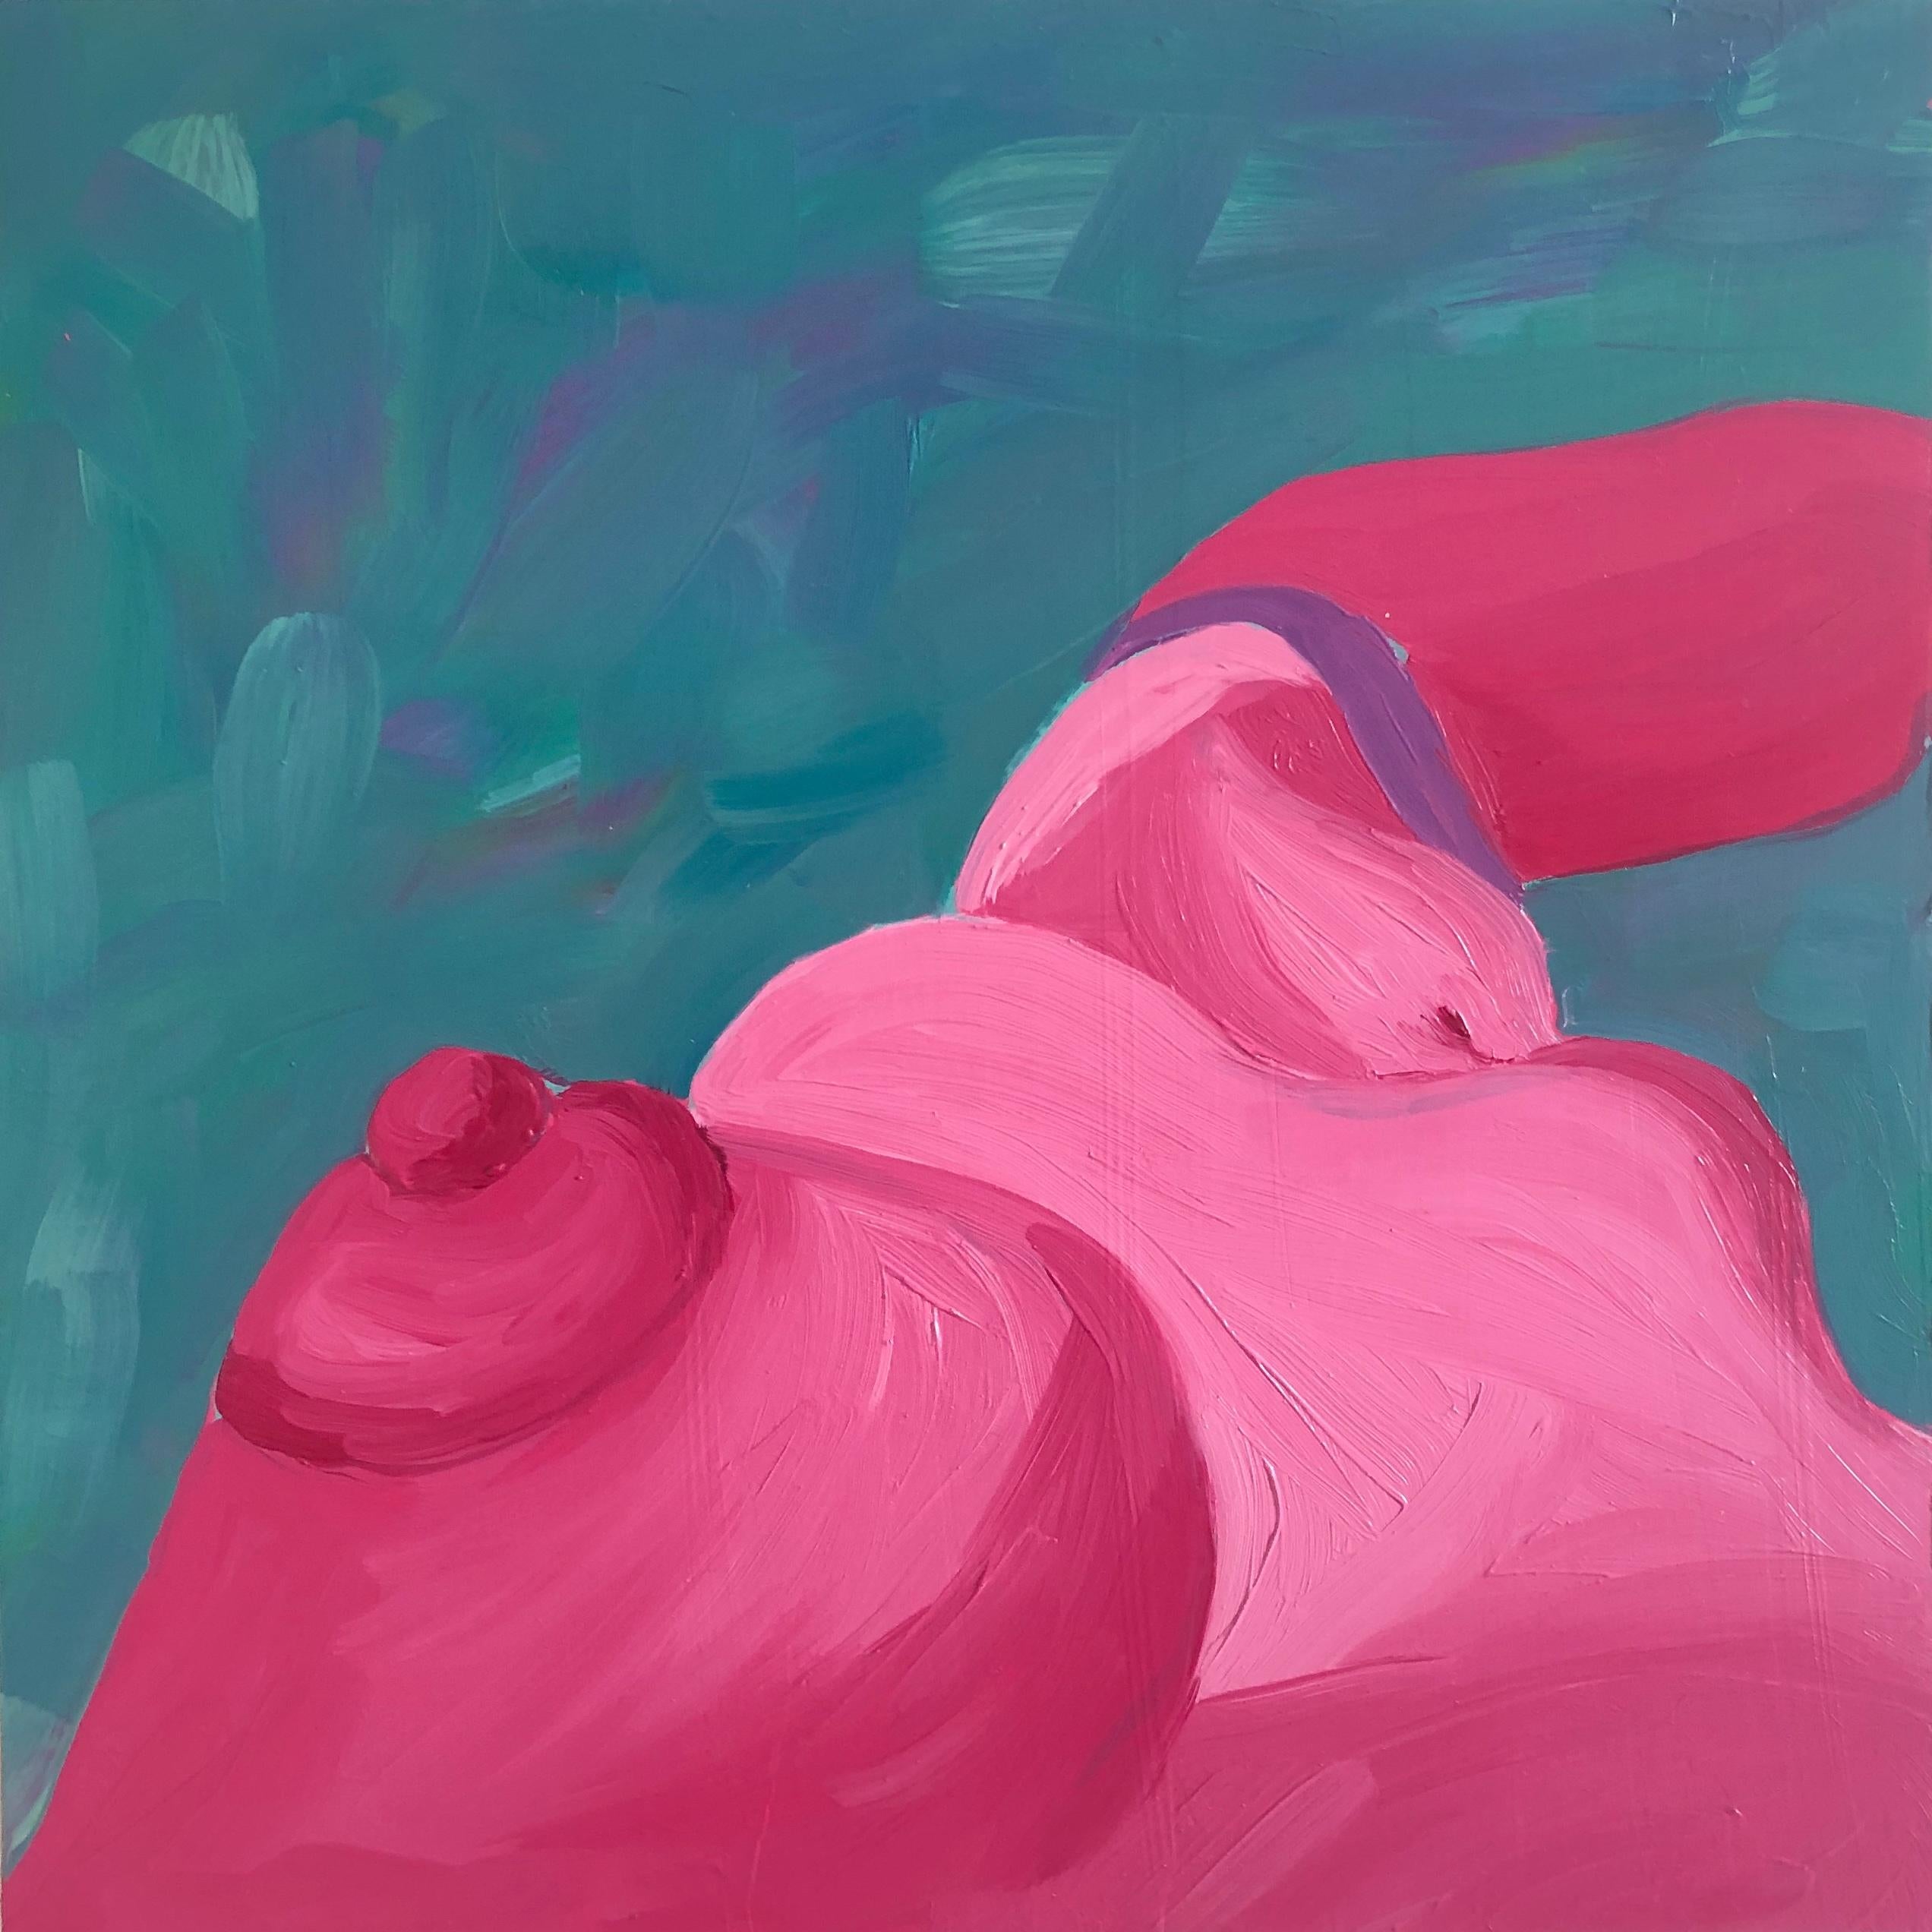 Blush (2020), hot pink nude figurative oil on wood panel painting, w/ turquoise